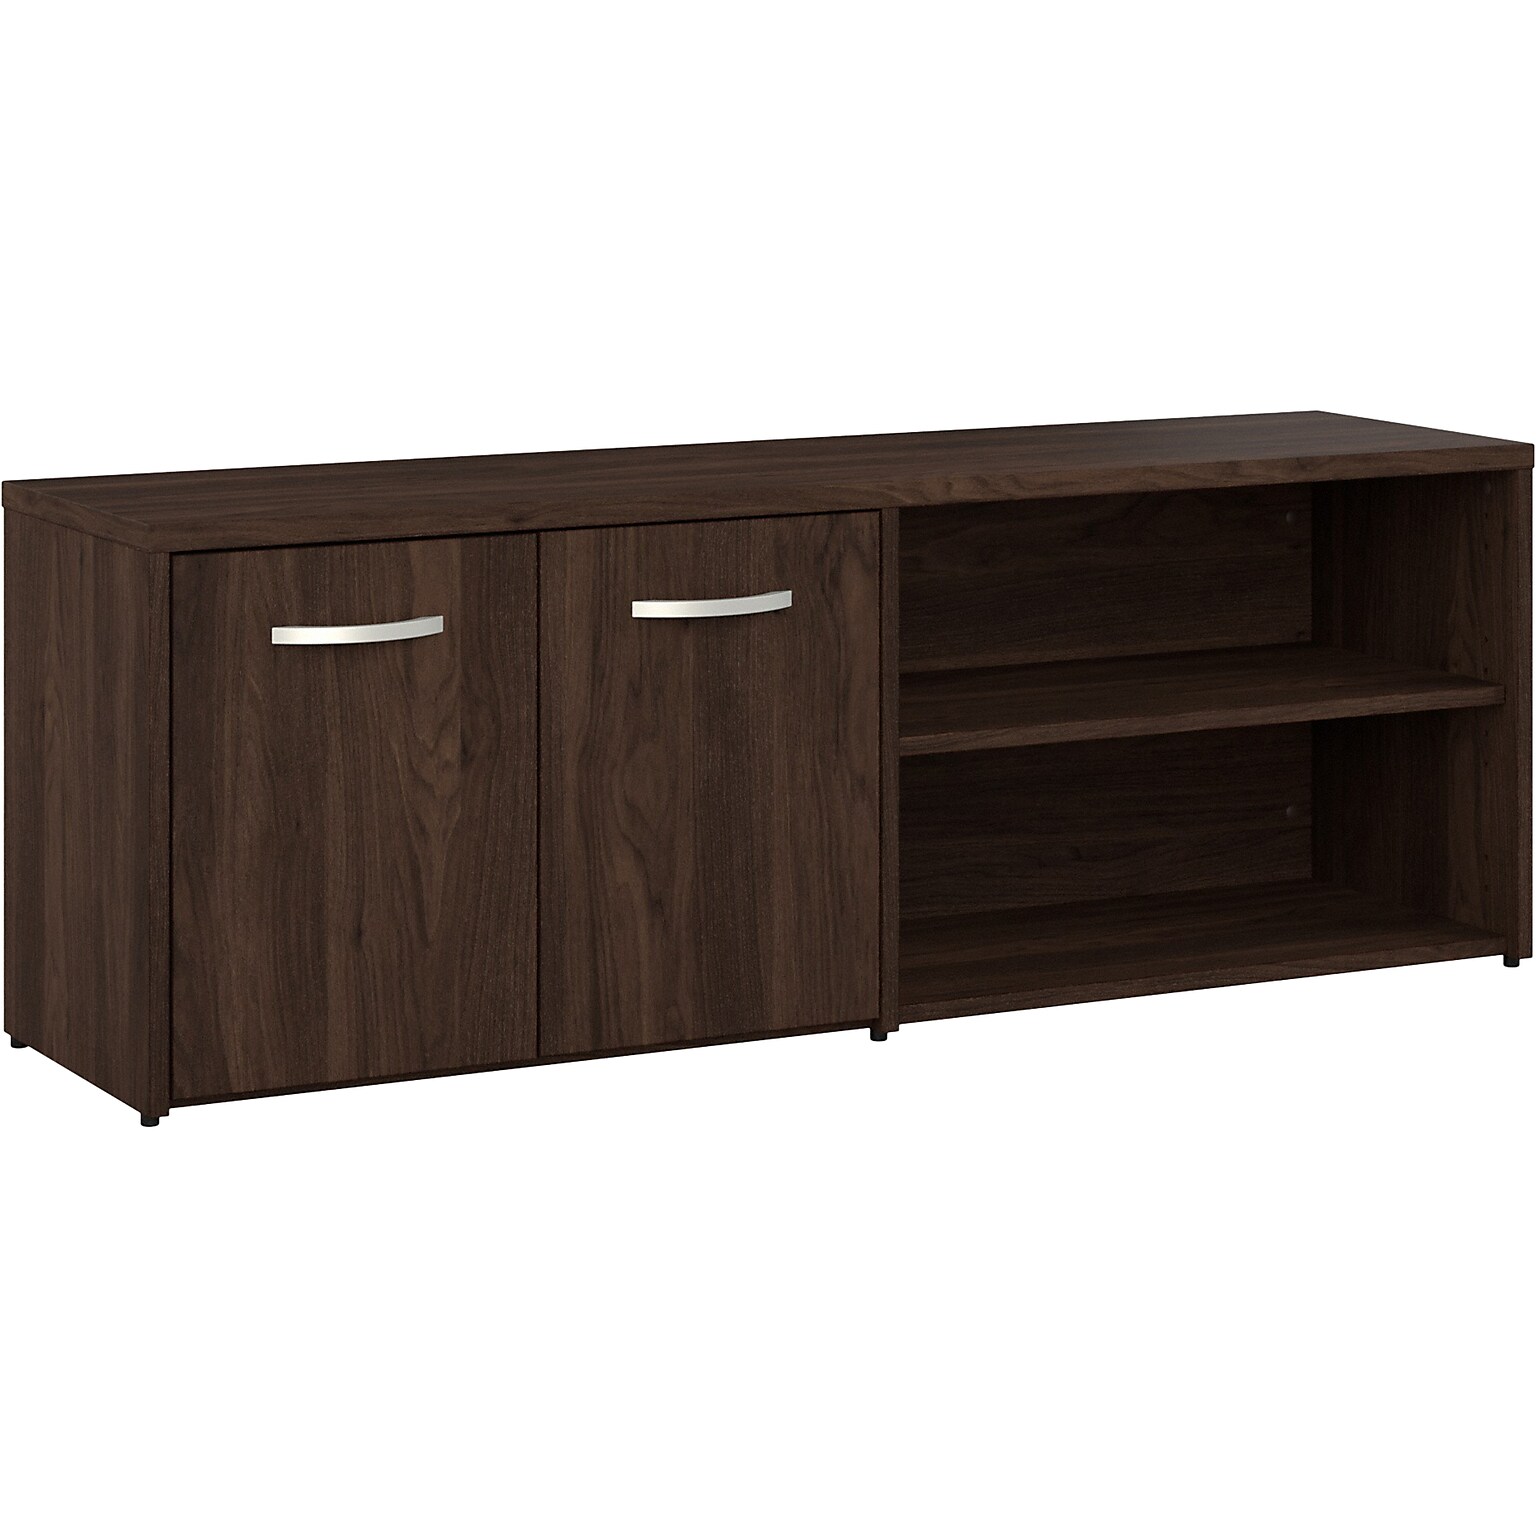 Bush Business Furniture Hybrid 21 Low Storage Cabinet with Doors and Shelves, Black Walnut (HYS160BW-Z)